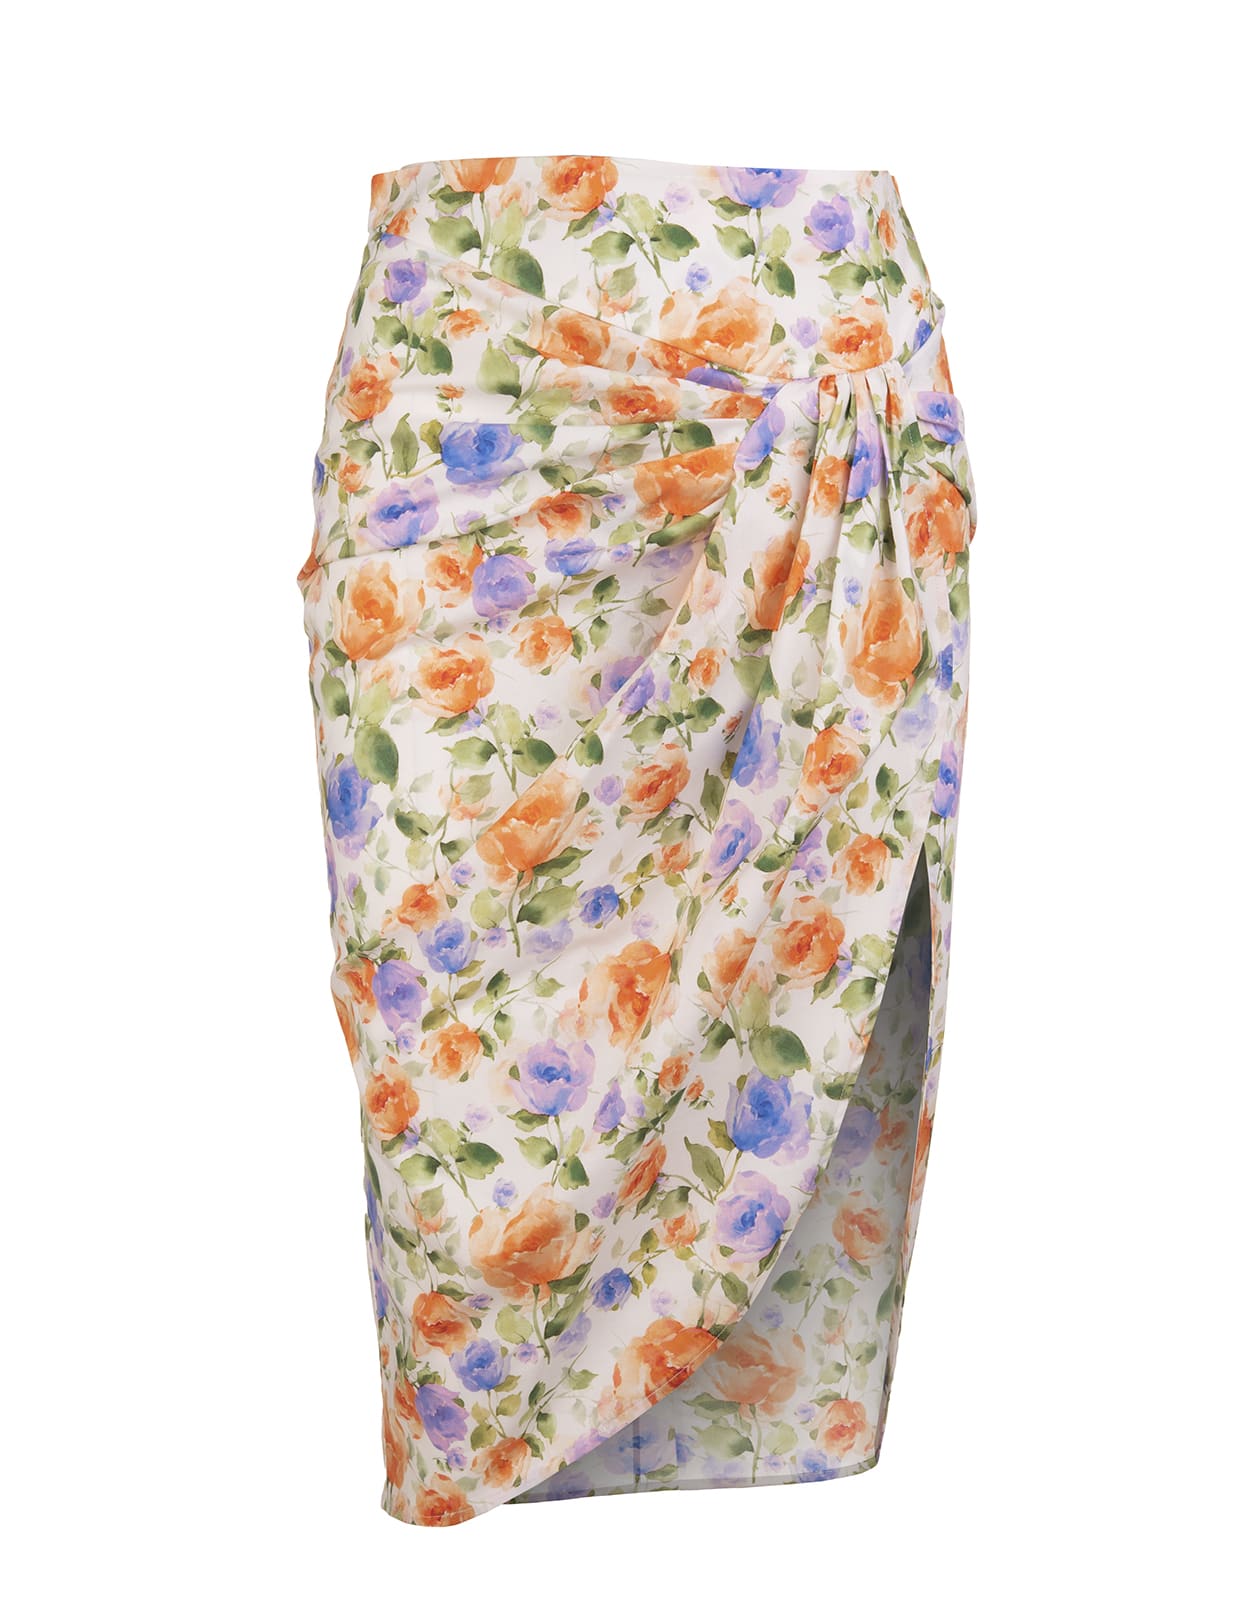 Giuseppe di Morabito Midi Skirt With Draping And All-over Lilac And Orange Floral Print